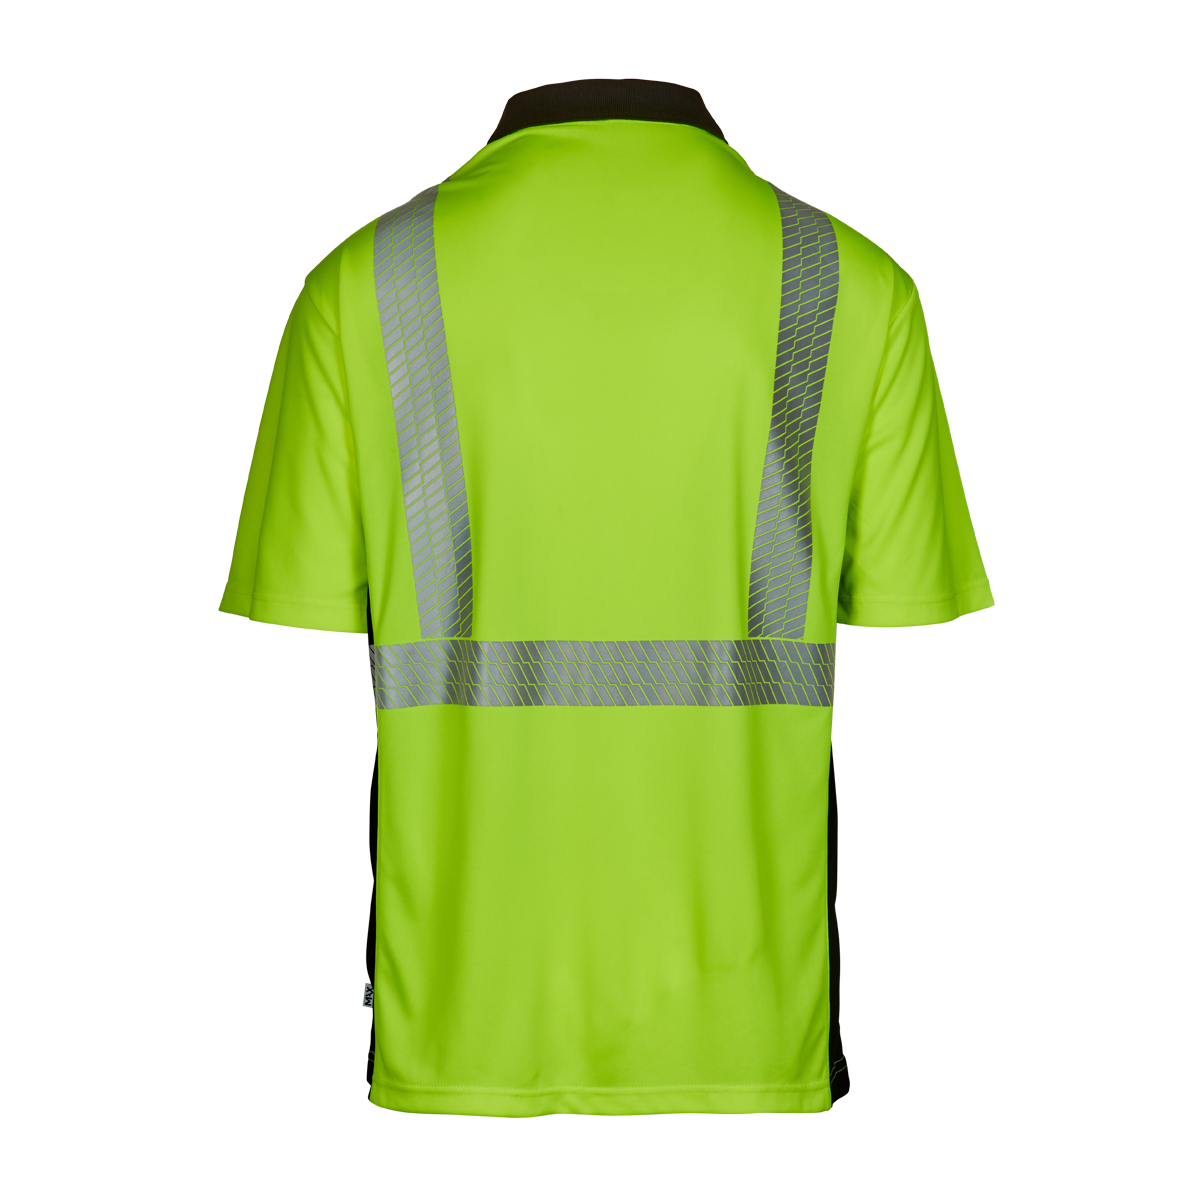 Picture of Max Apparel MAX410 Class 2 Polo Shirt, Safety Green/Black Bottom